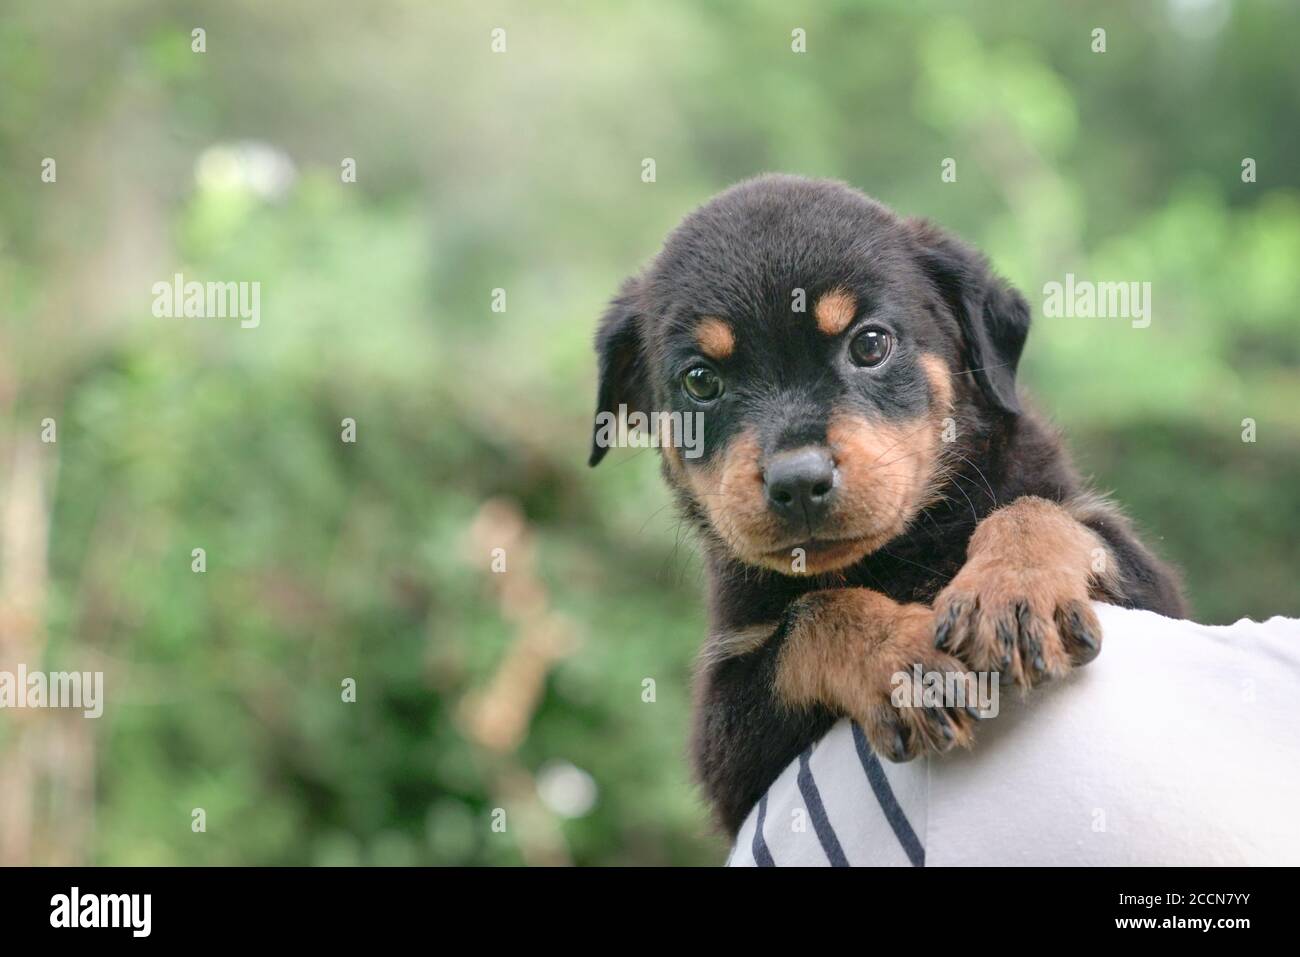 Cute puppy dog cling on the shoulder of adult man. Looking at camera. Copy space. Stock Photo